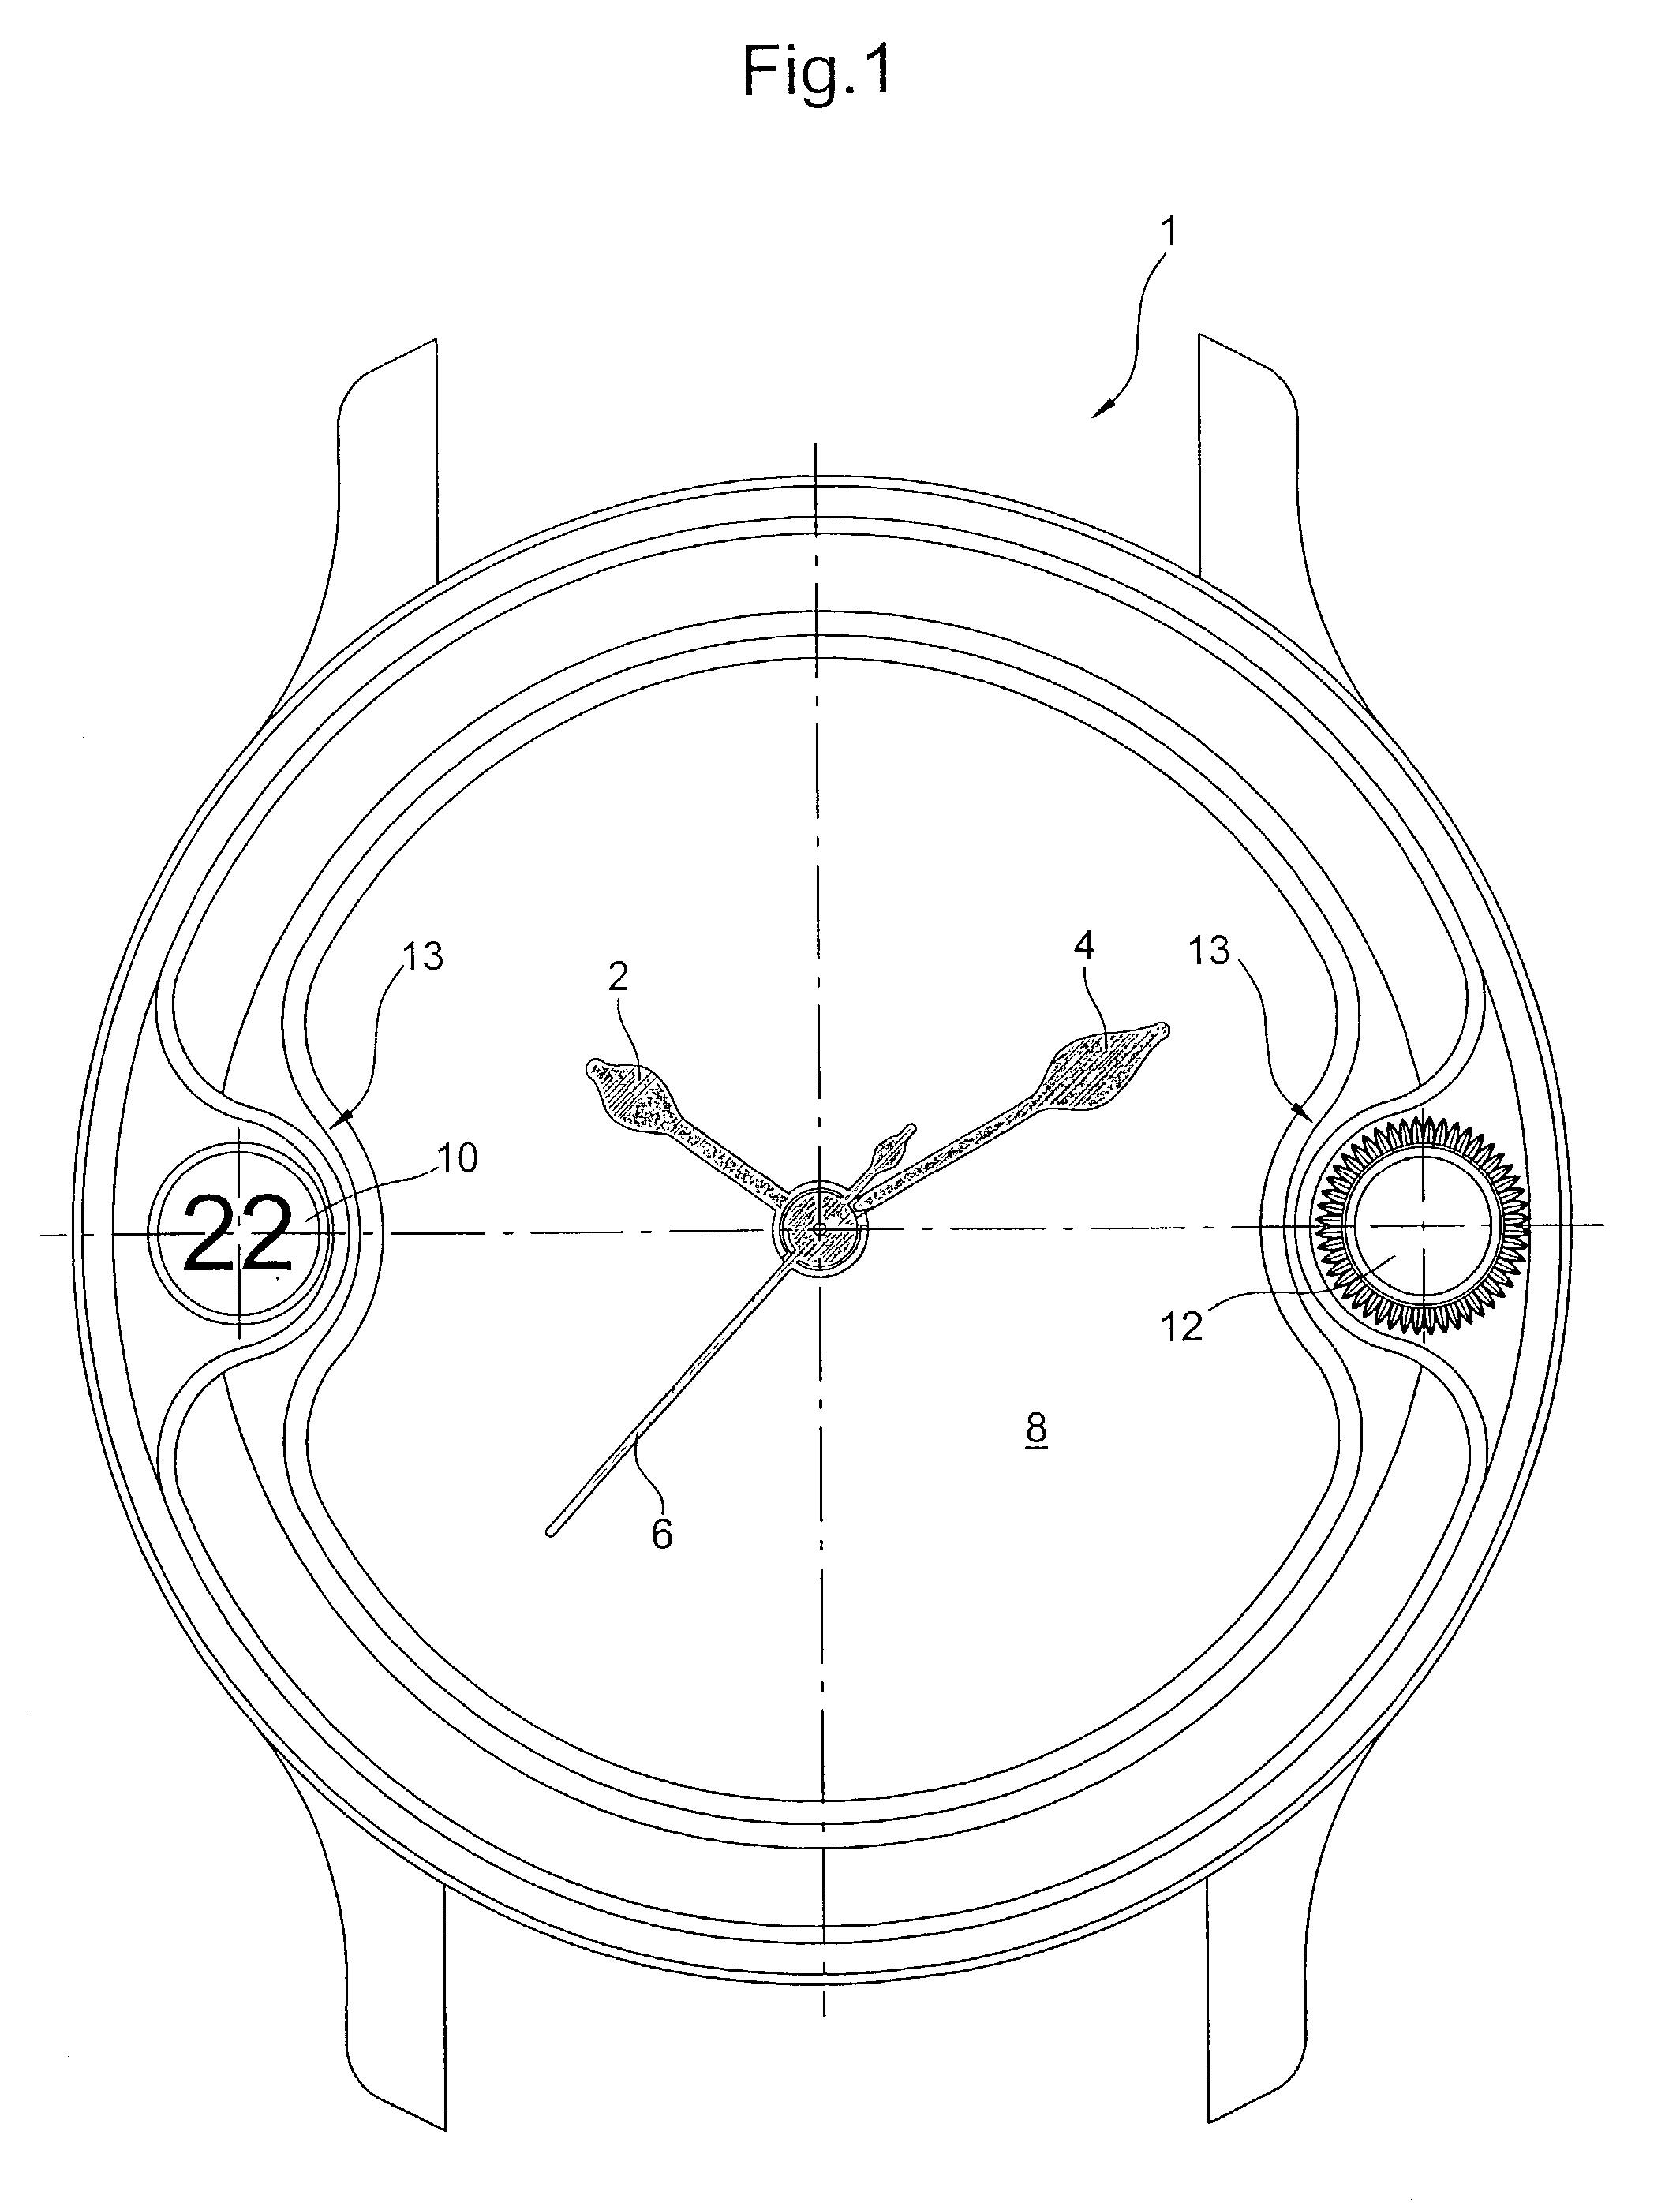 Device for winding and setting the time of a timepiece such as a date-watch including a date disc